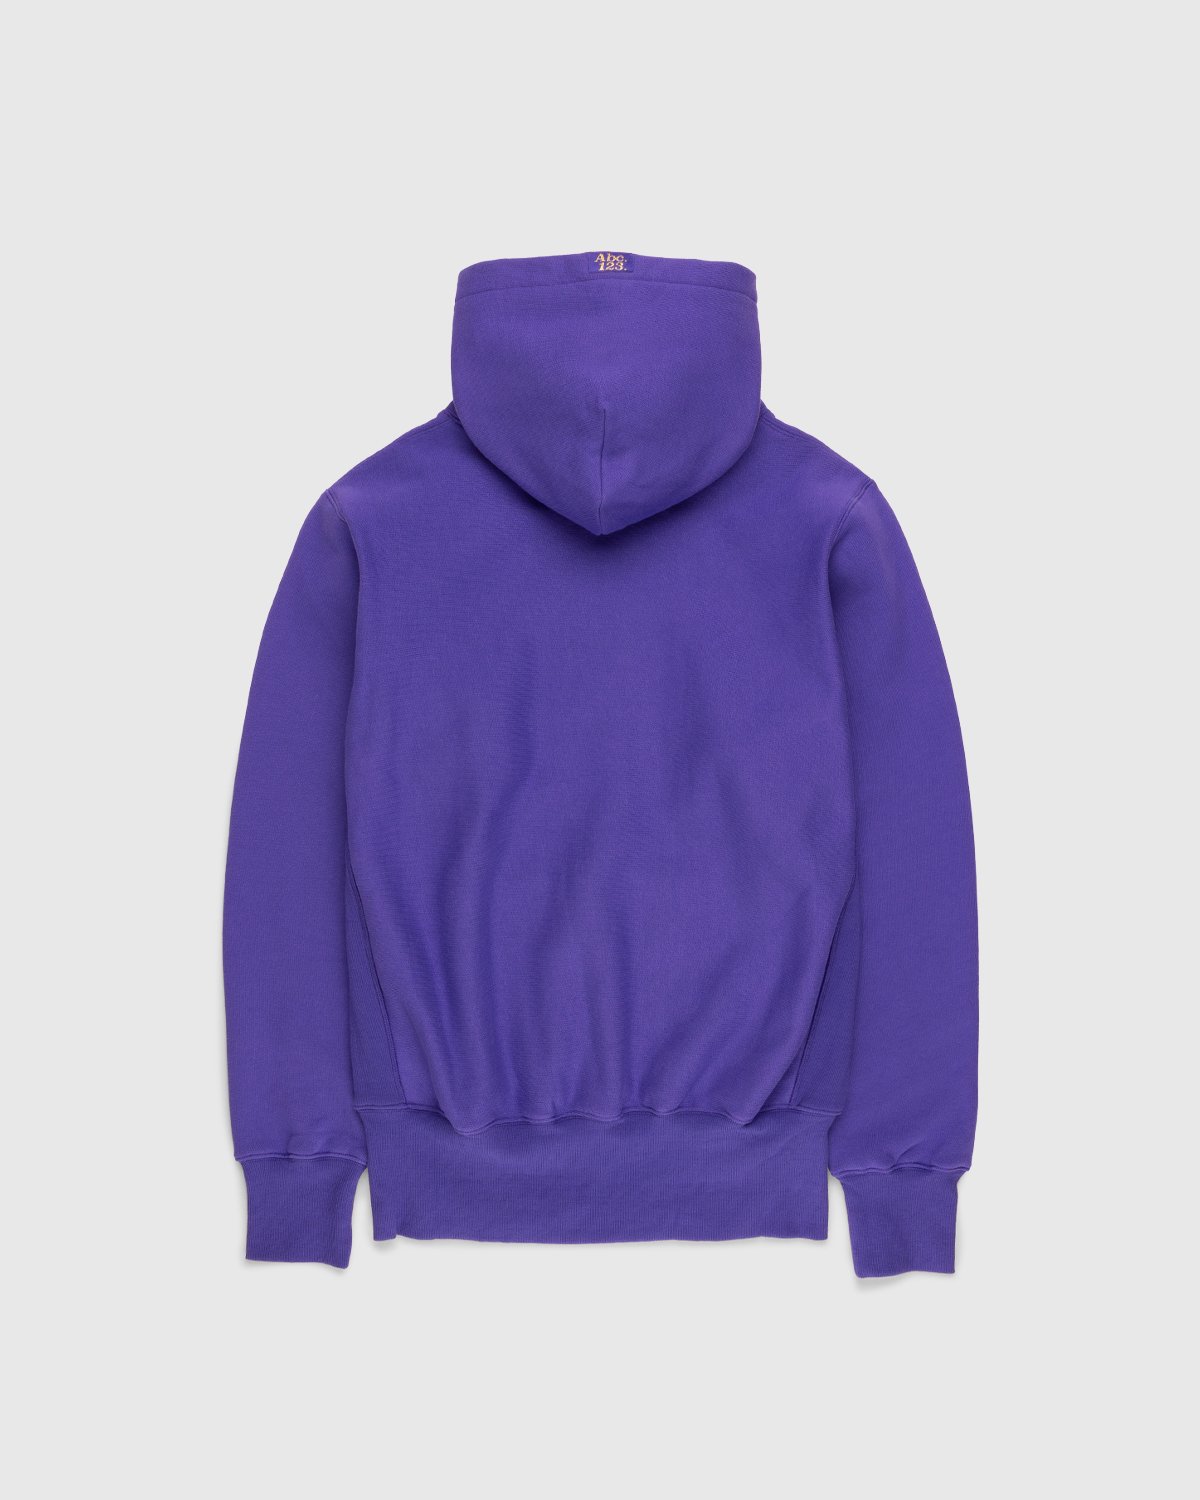 Abc. - Pullover Hoodie Sapphire - Clothing - Blue - Image 2